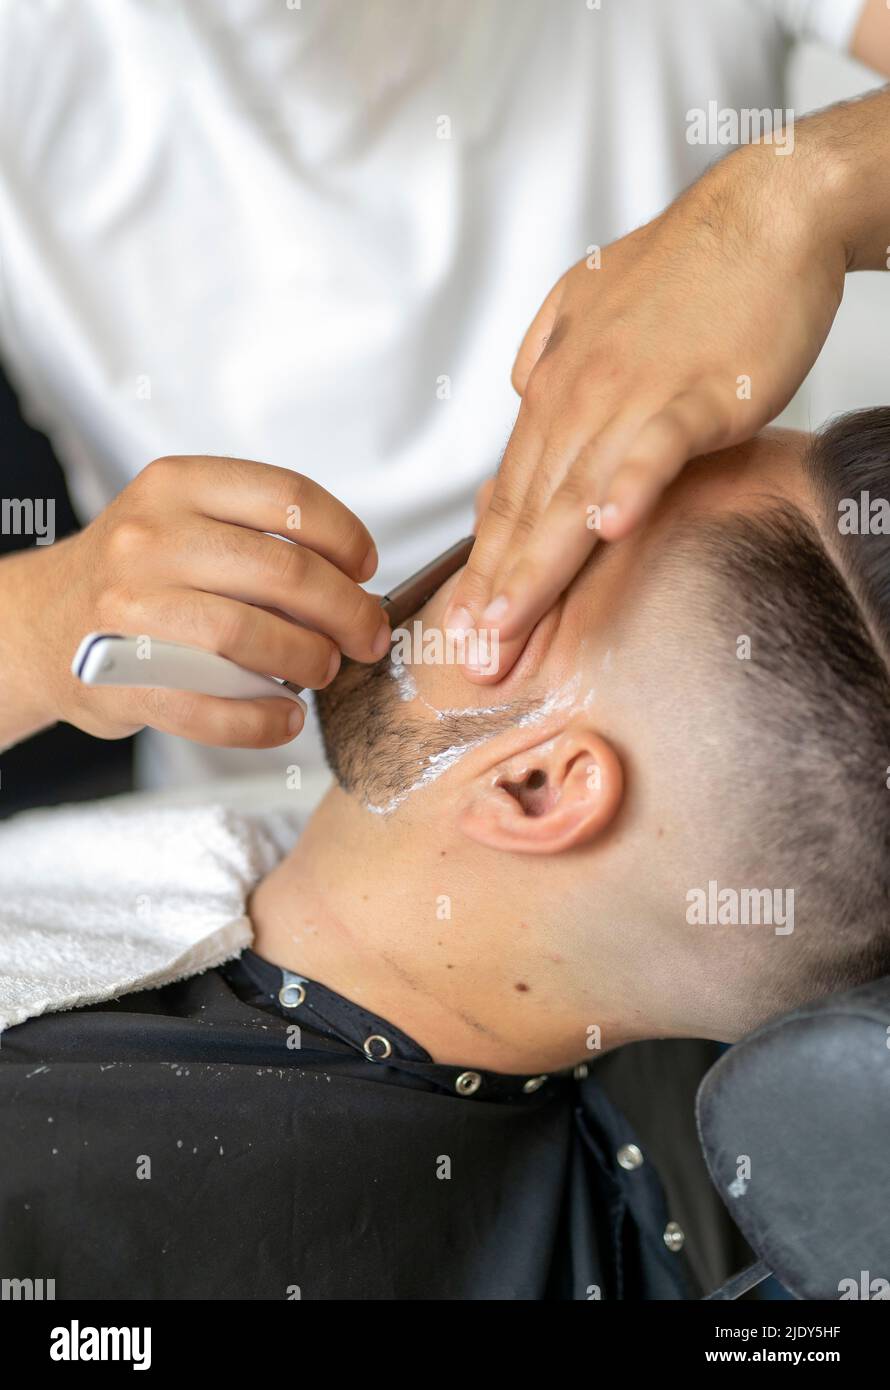 professional barber shaving a client Stock Photo